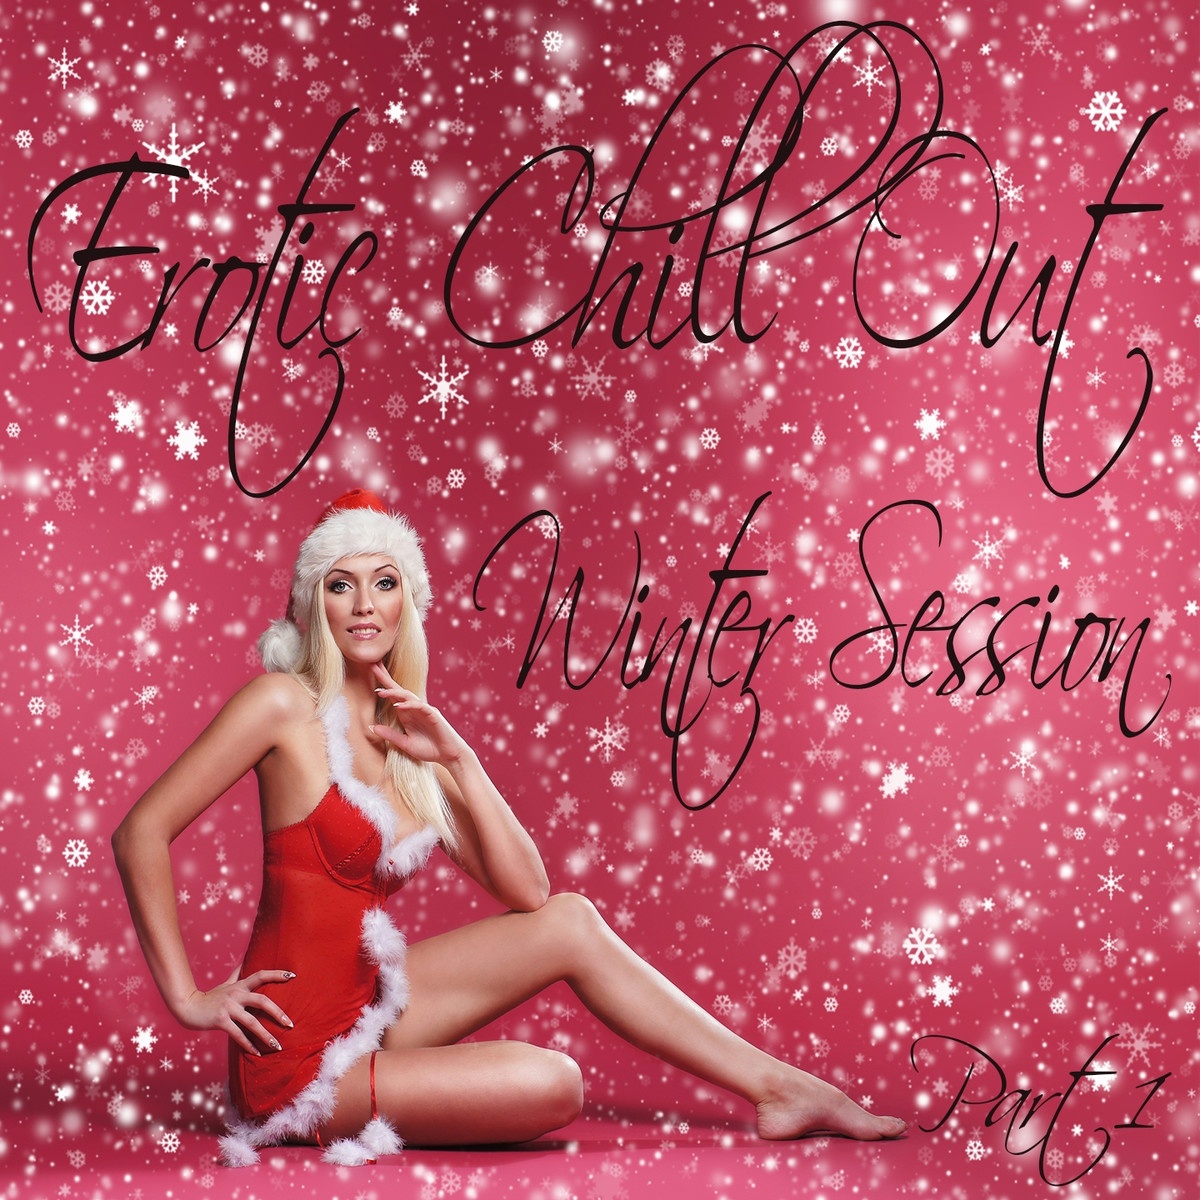 Erotic Chill Out Winter Session, Pt. 1 (Lounge Deluxe And Sexy Xmas Grooves)